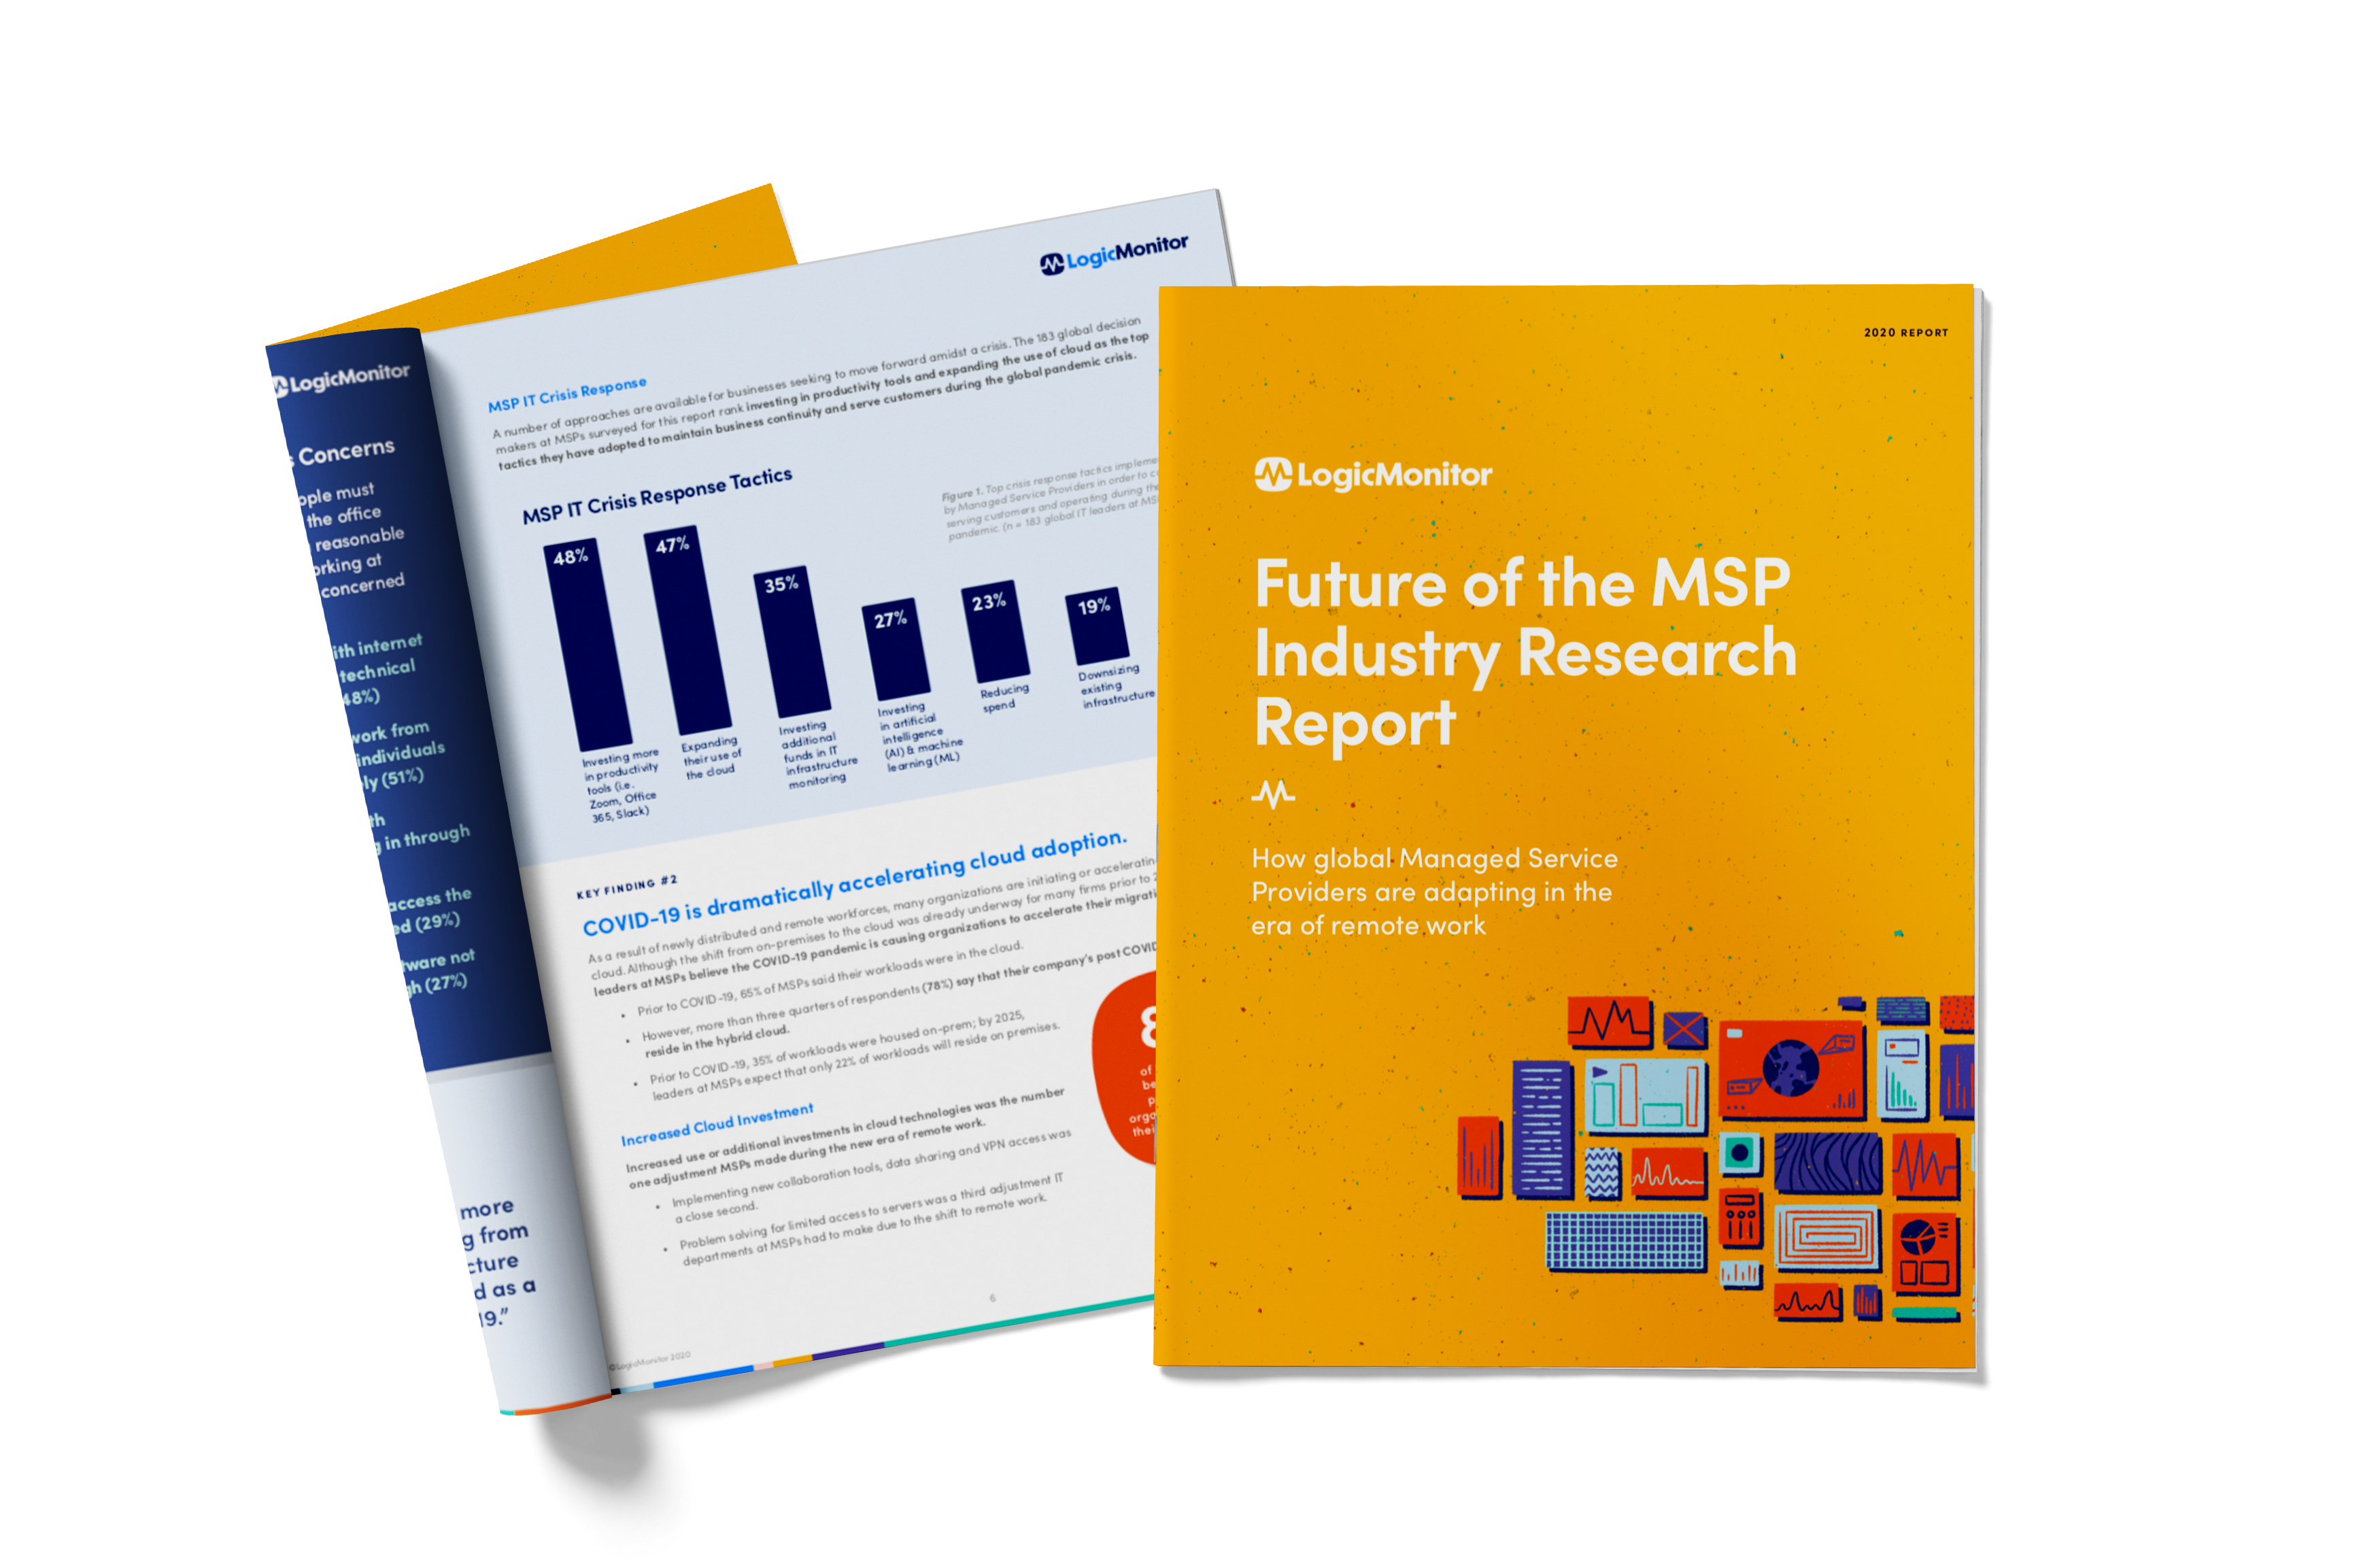 Future of the MSP Industry Research Report